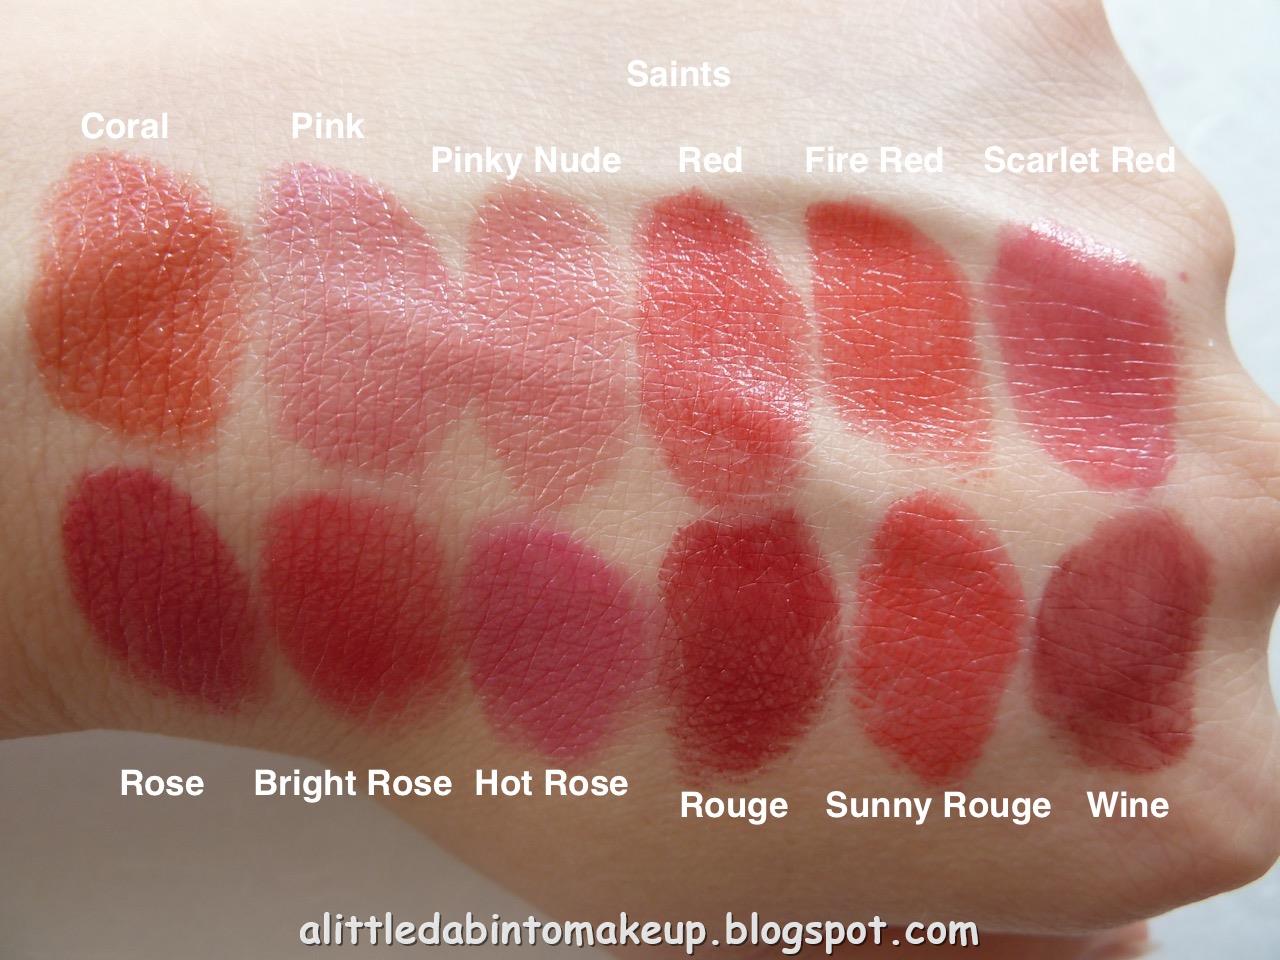 forklædning fax aritmetik Of Toys and Co: Lipstick Queen Lipsticks Comparison Swatches